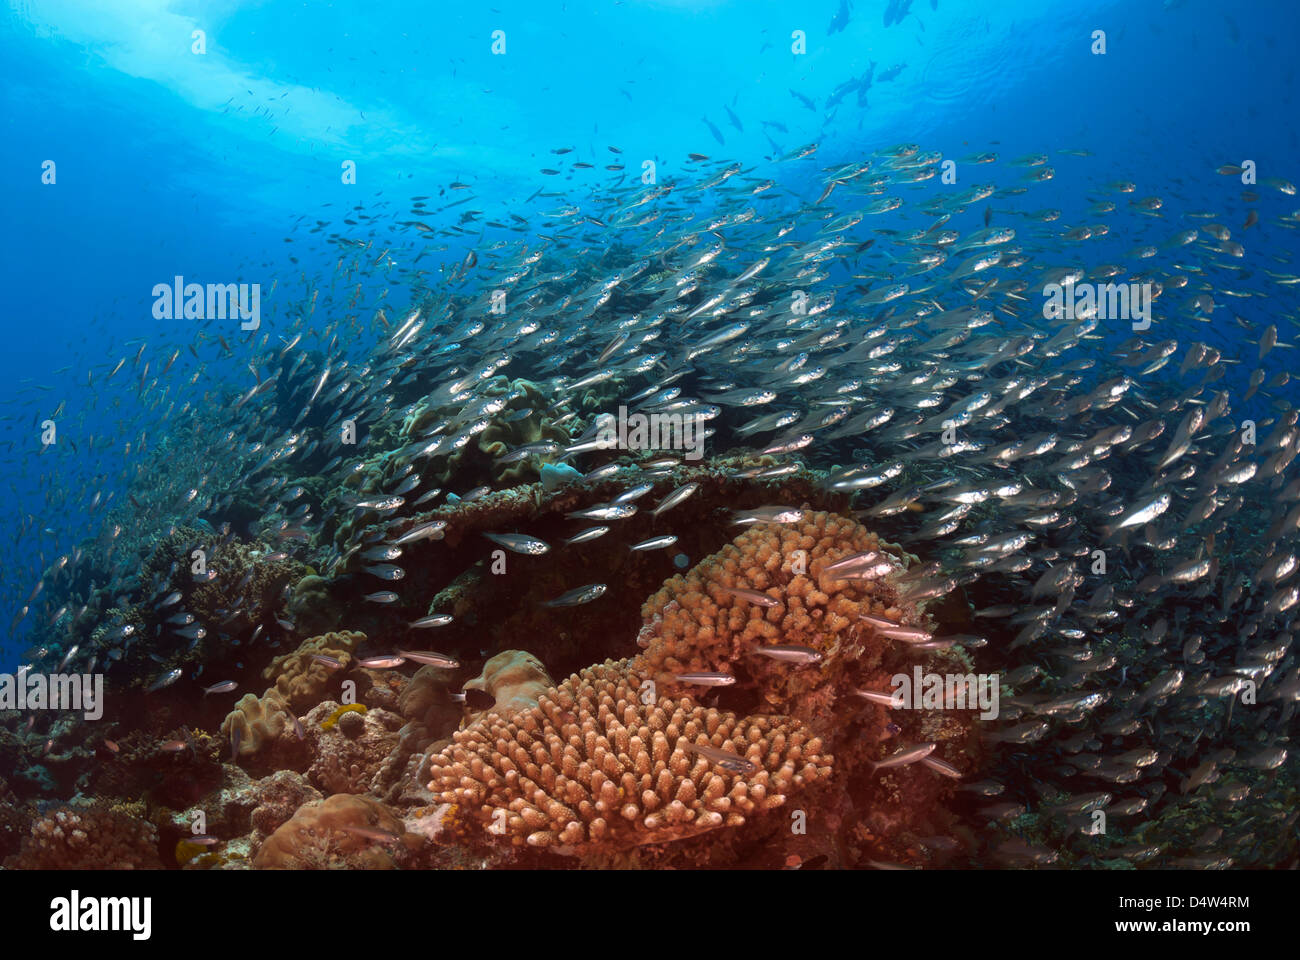 Coral Reef with Reef Fish, Great Barrier Reef, Coral Sea, Pacific Ocean, Queensland, Australia Stock Photo